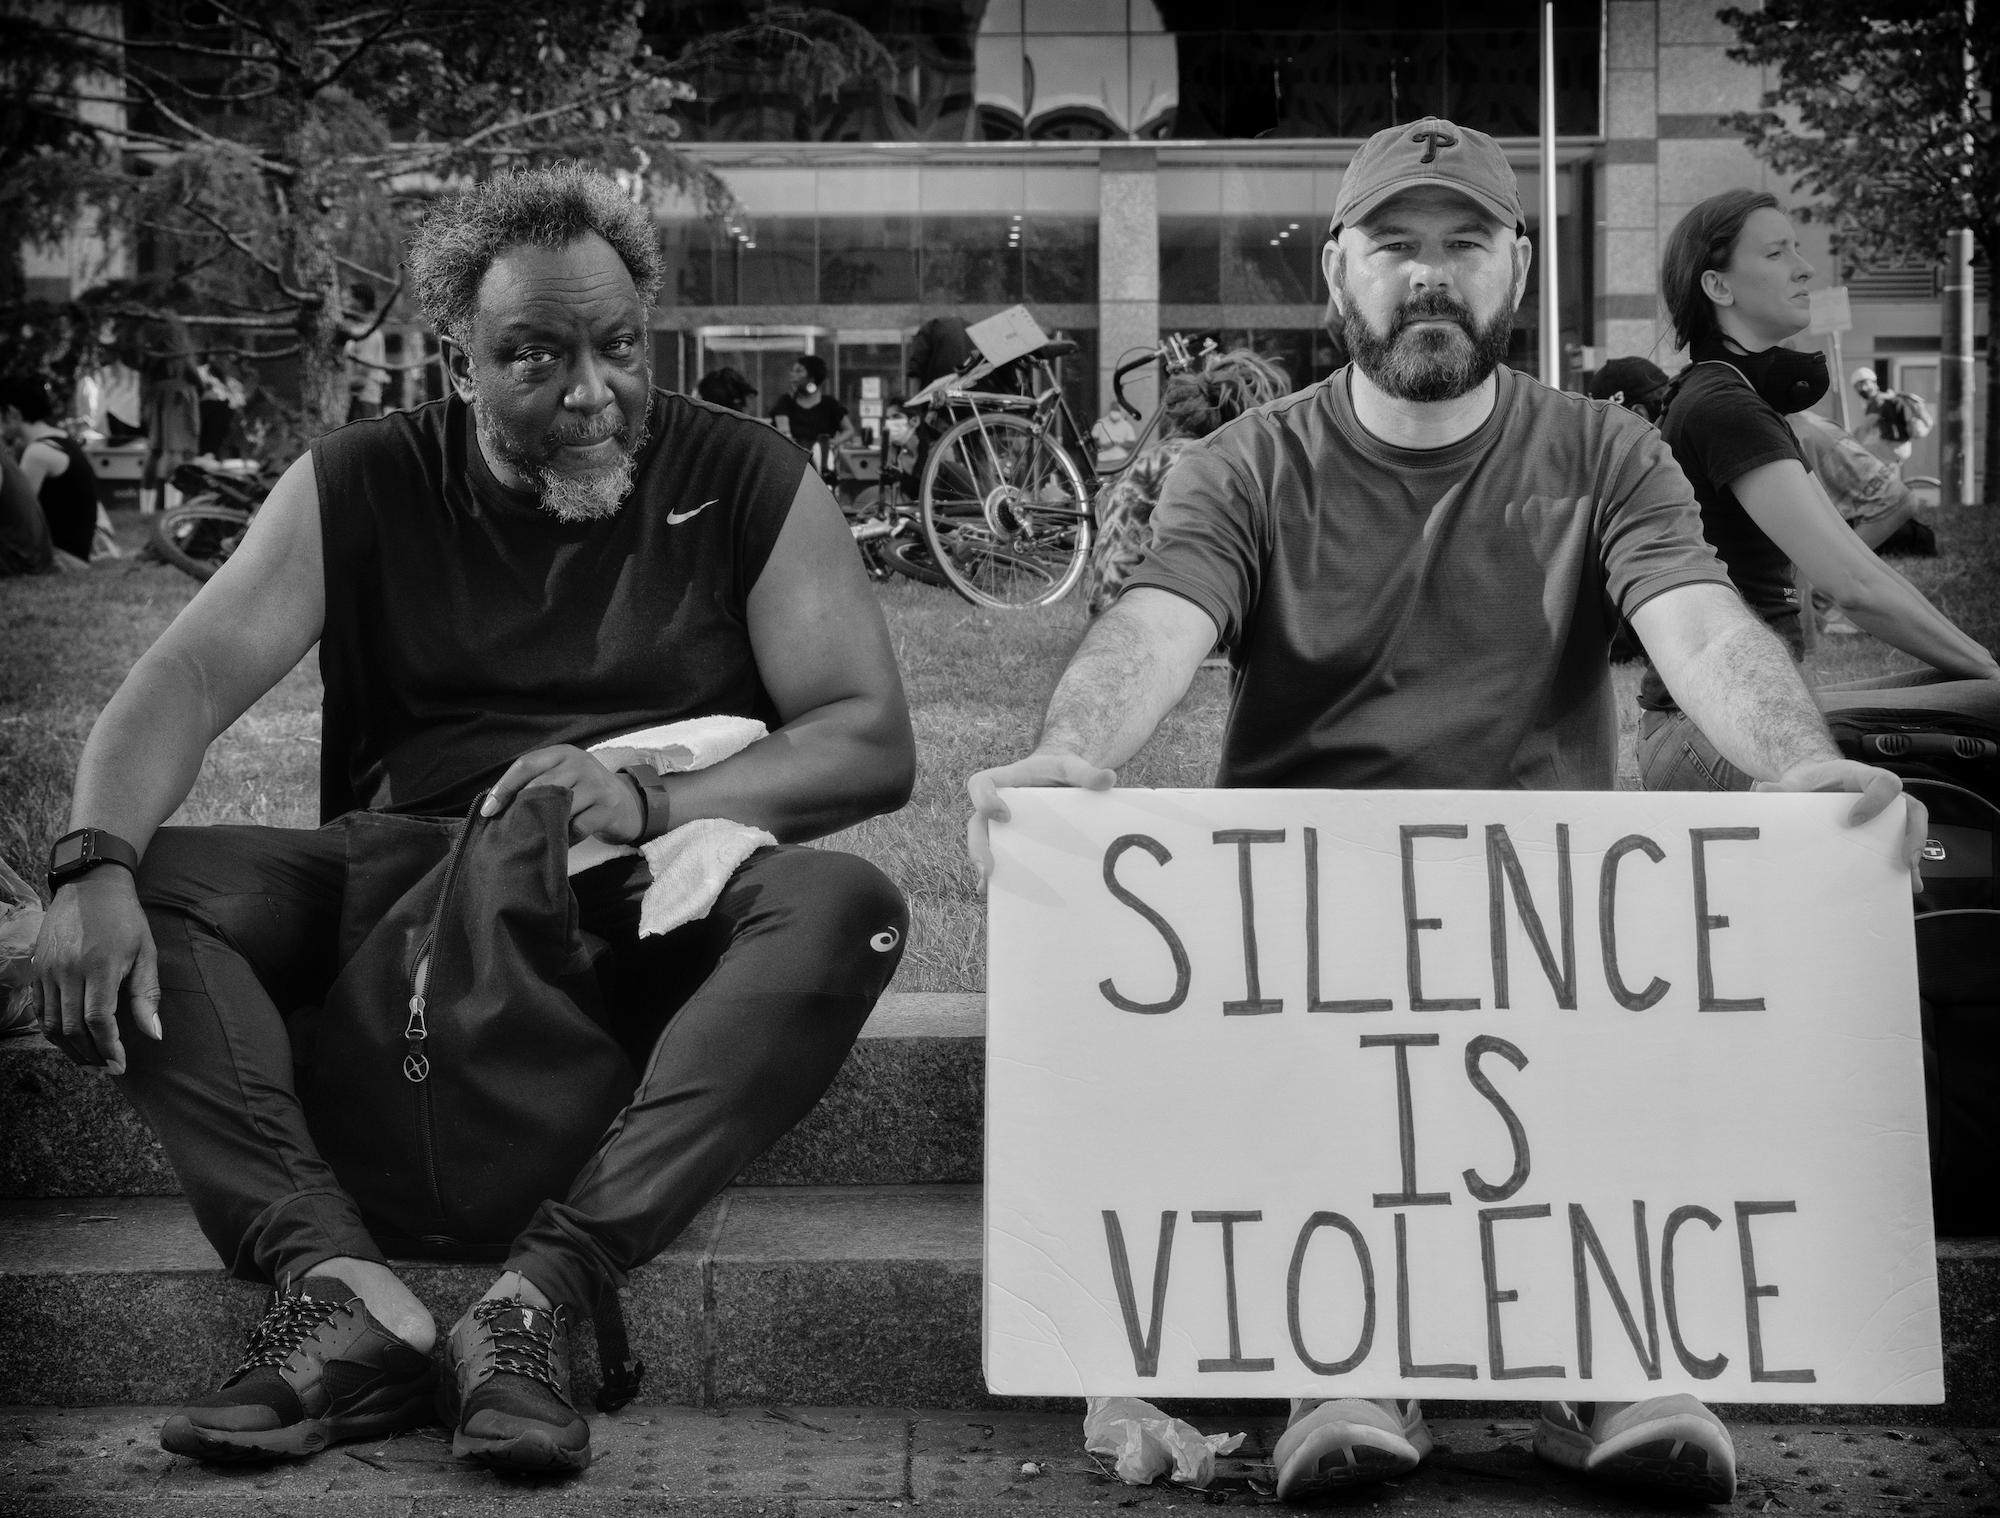 Ada Trillo Black and White Photograph - Silence is Violence: Black Lives Matter city documentary photo w/ 2 men & bikes